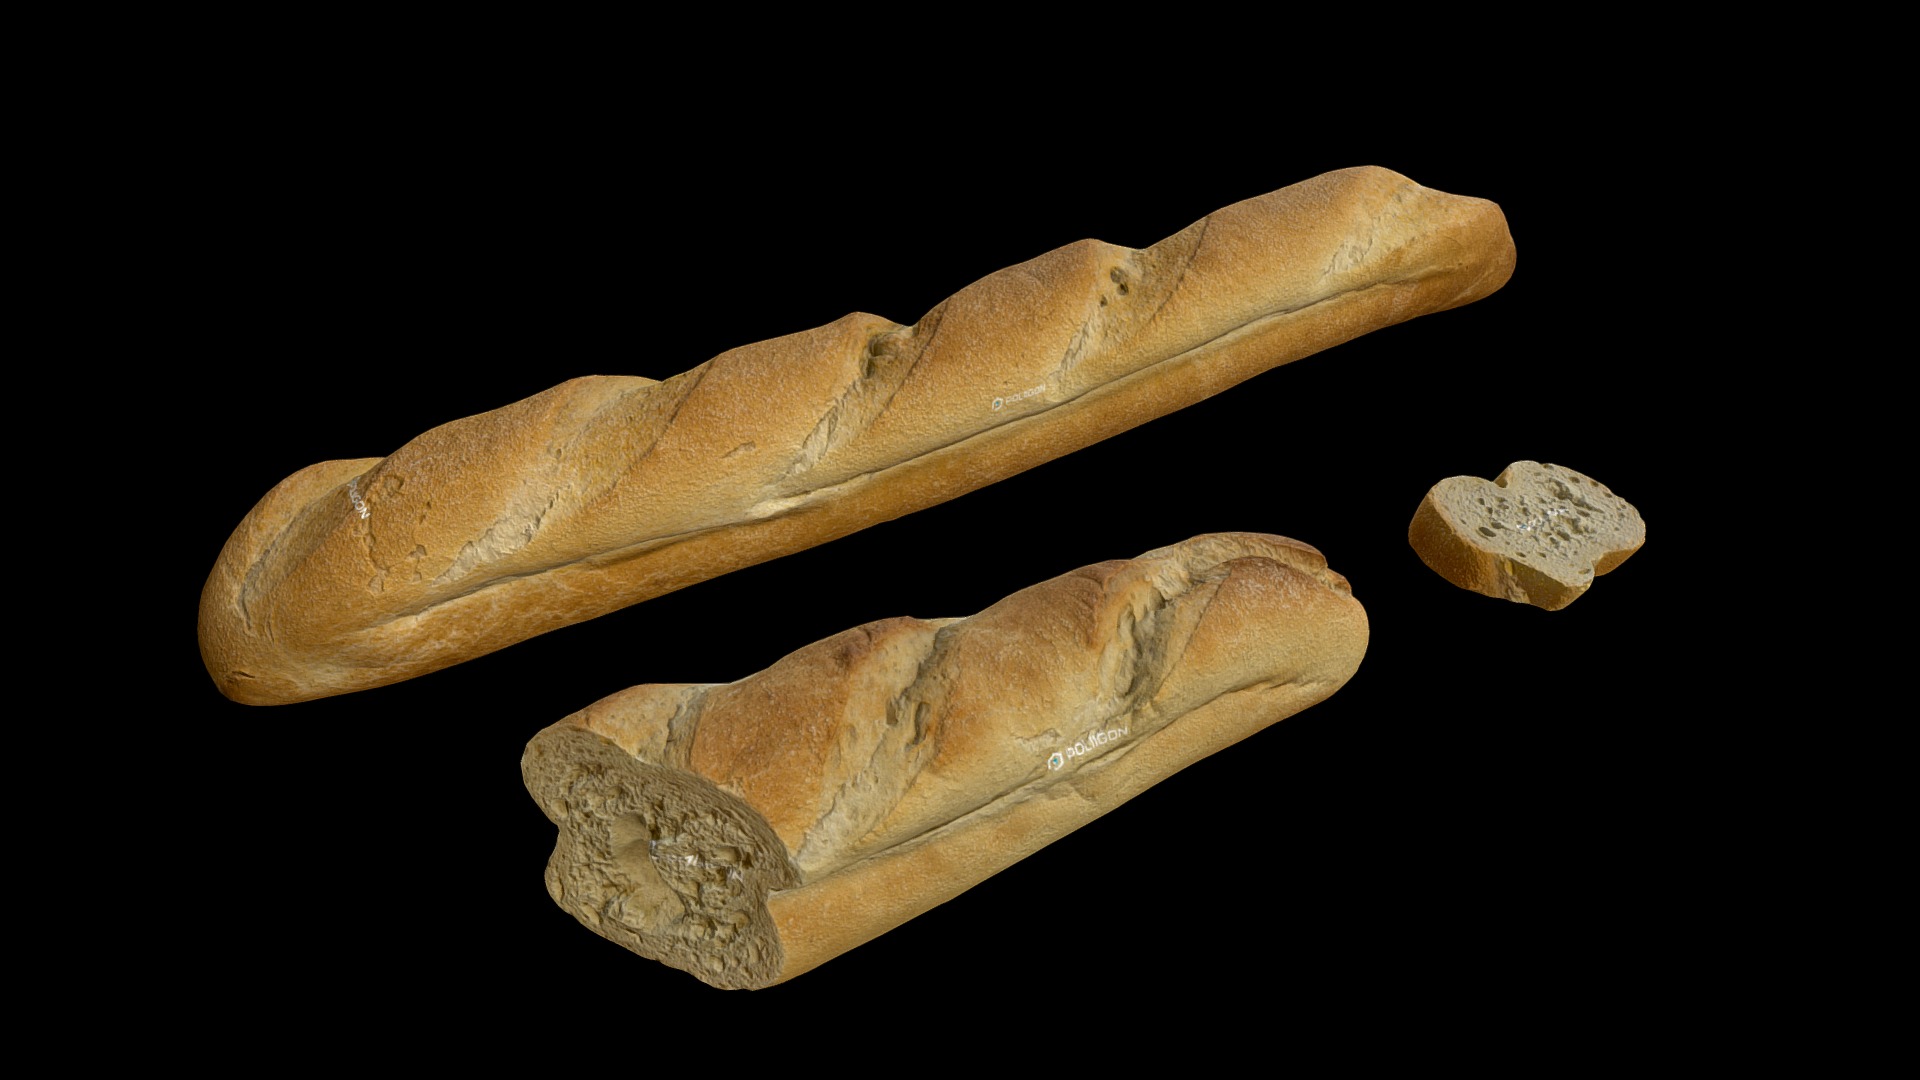 Find on Poliigon.com at https://www.poliigon.com/texture/bread-baguettes-french-001 - Bread Baguettes French 001 - 3D model by Poliigon.com (@poliigon) 3d model